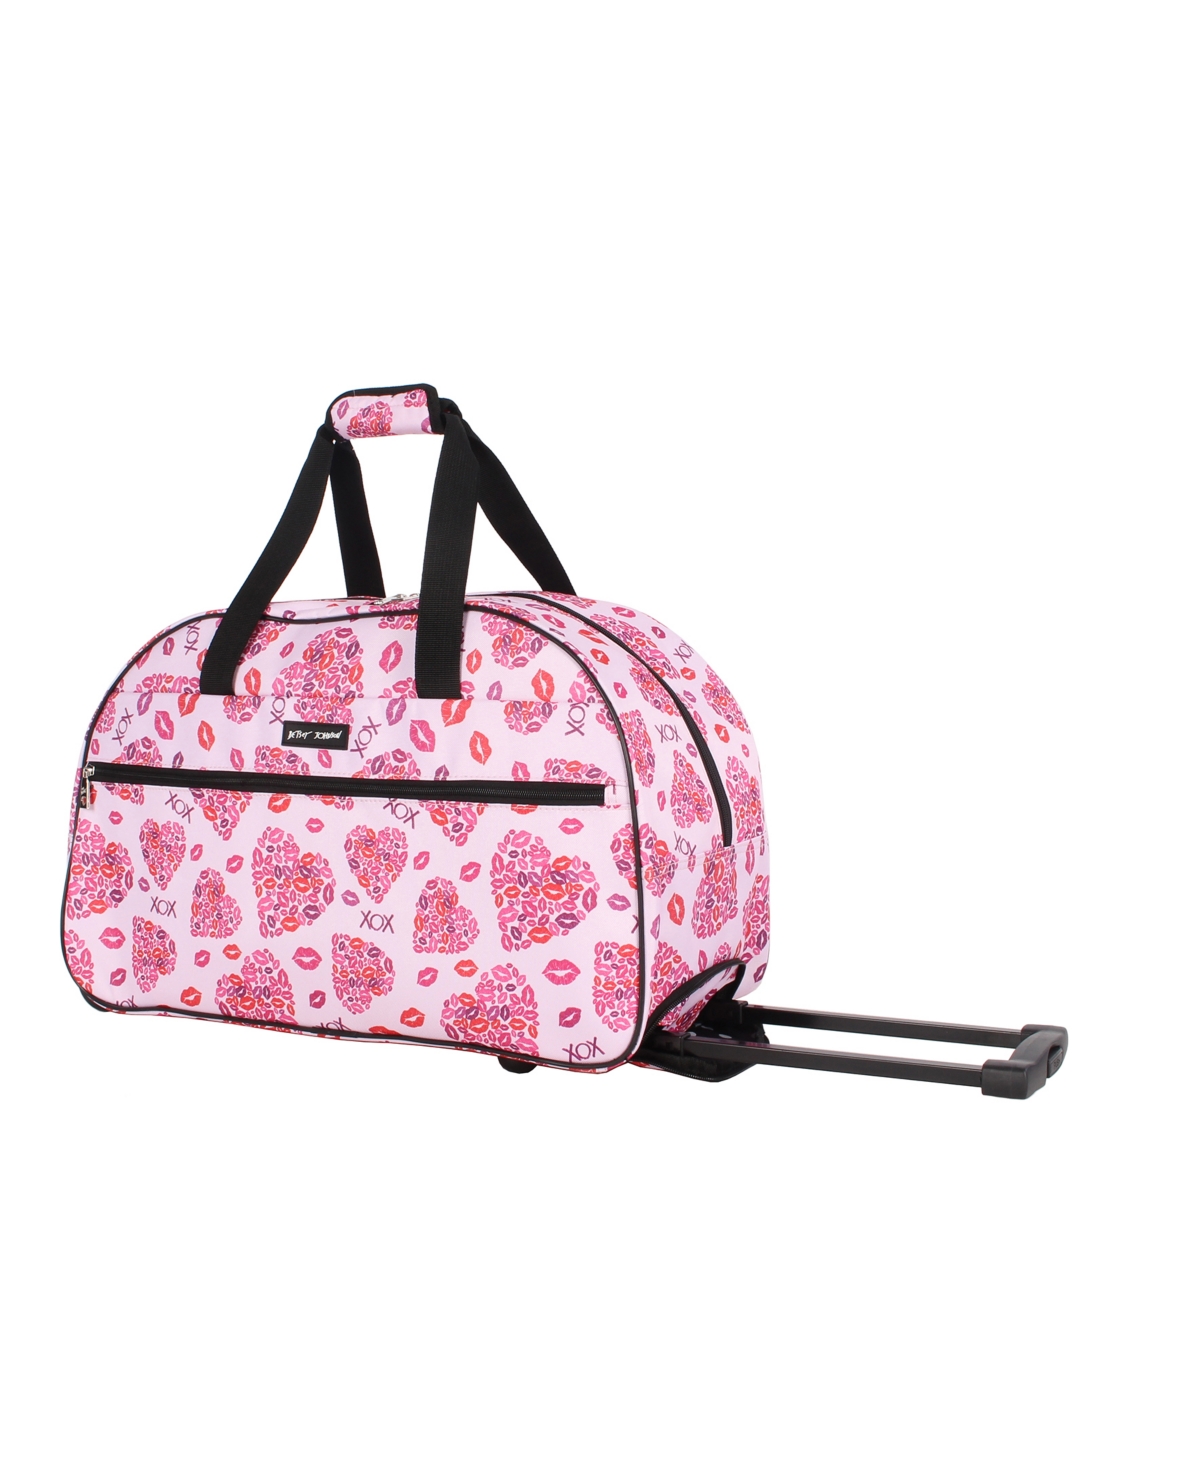 Betsey Johnson Carry-on Softside Rolling Duffel Bag In Lips Xox